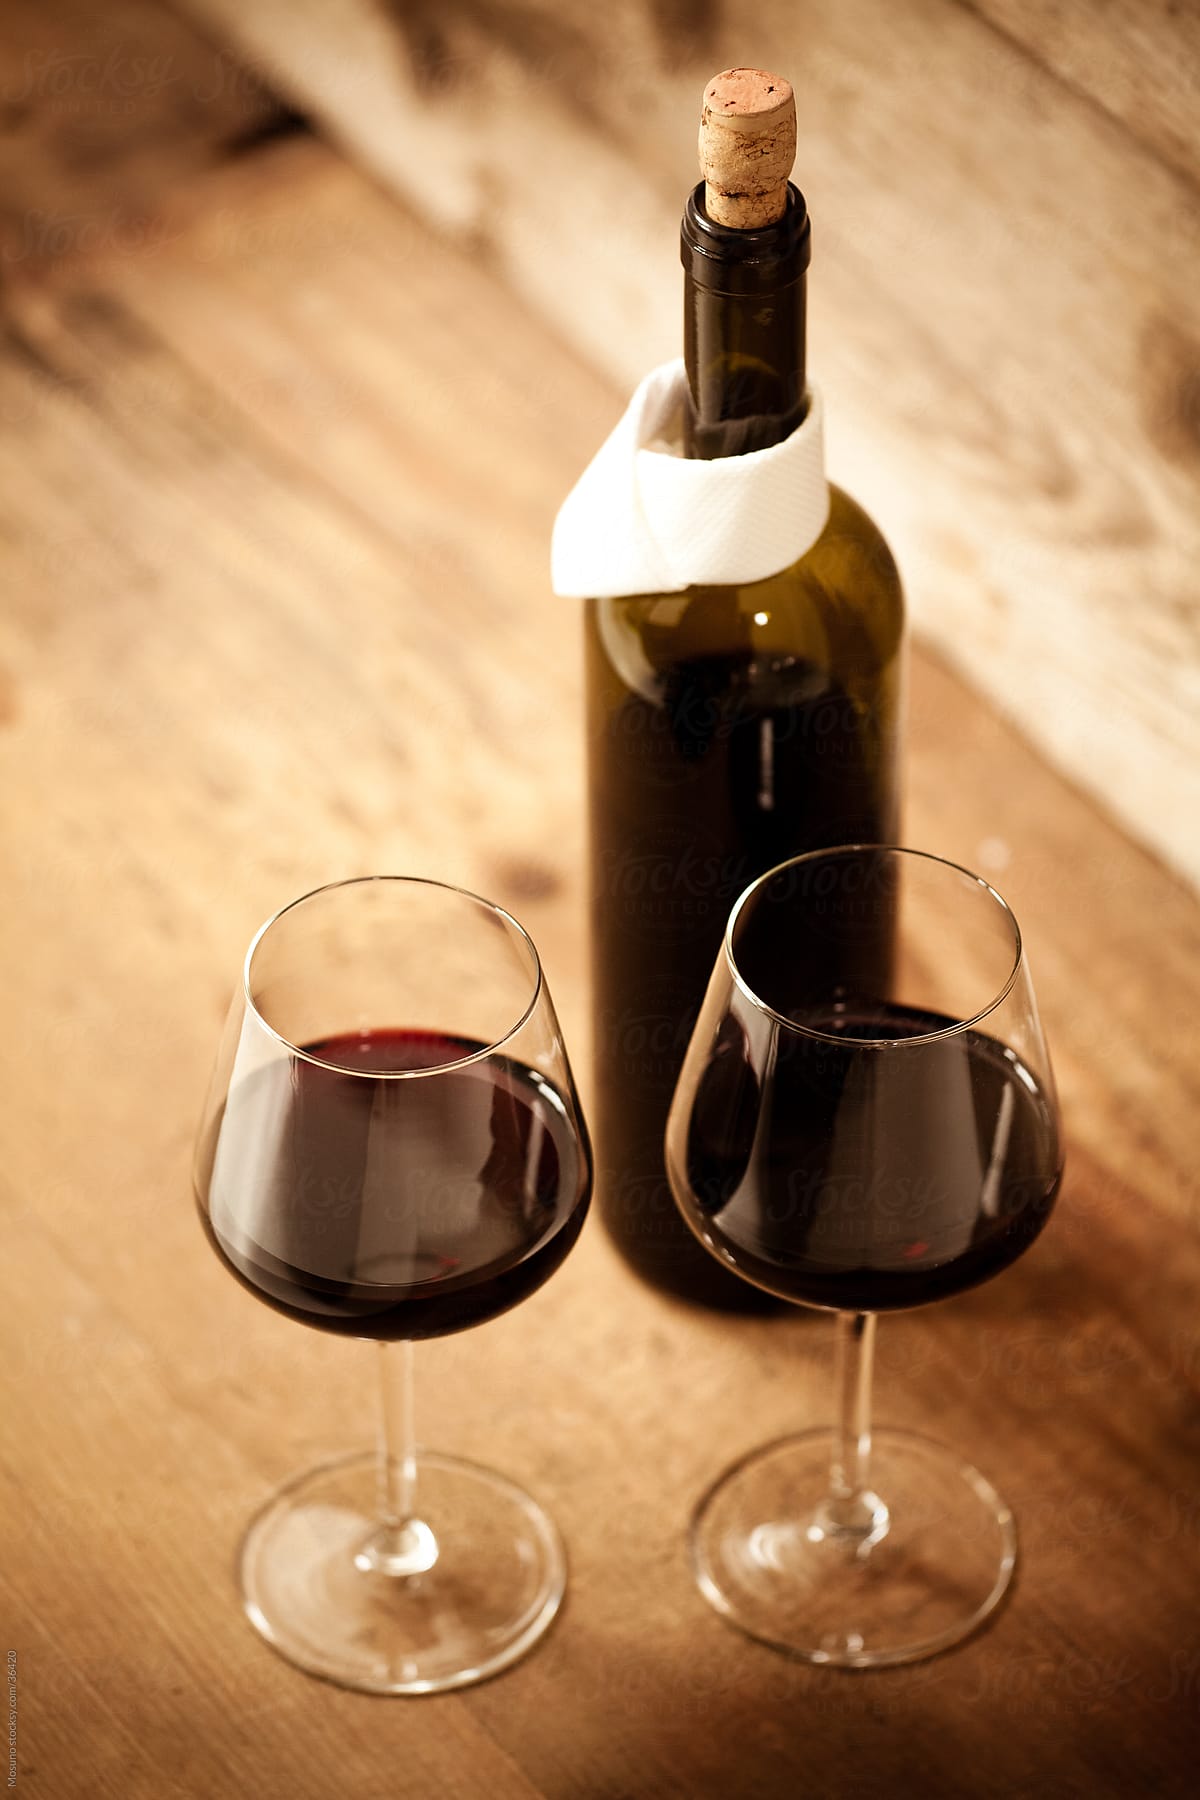 Two glasses of wine and a bottle on a wooden table.